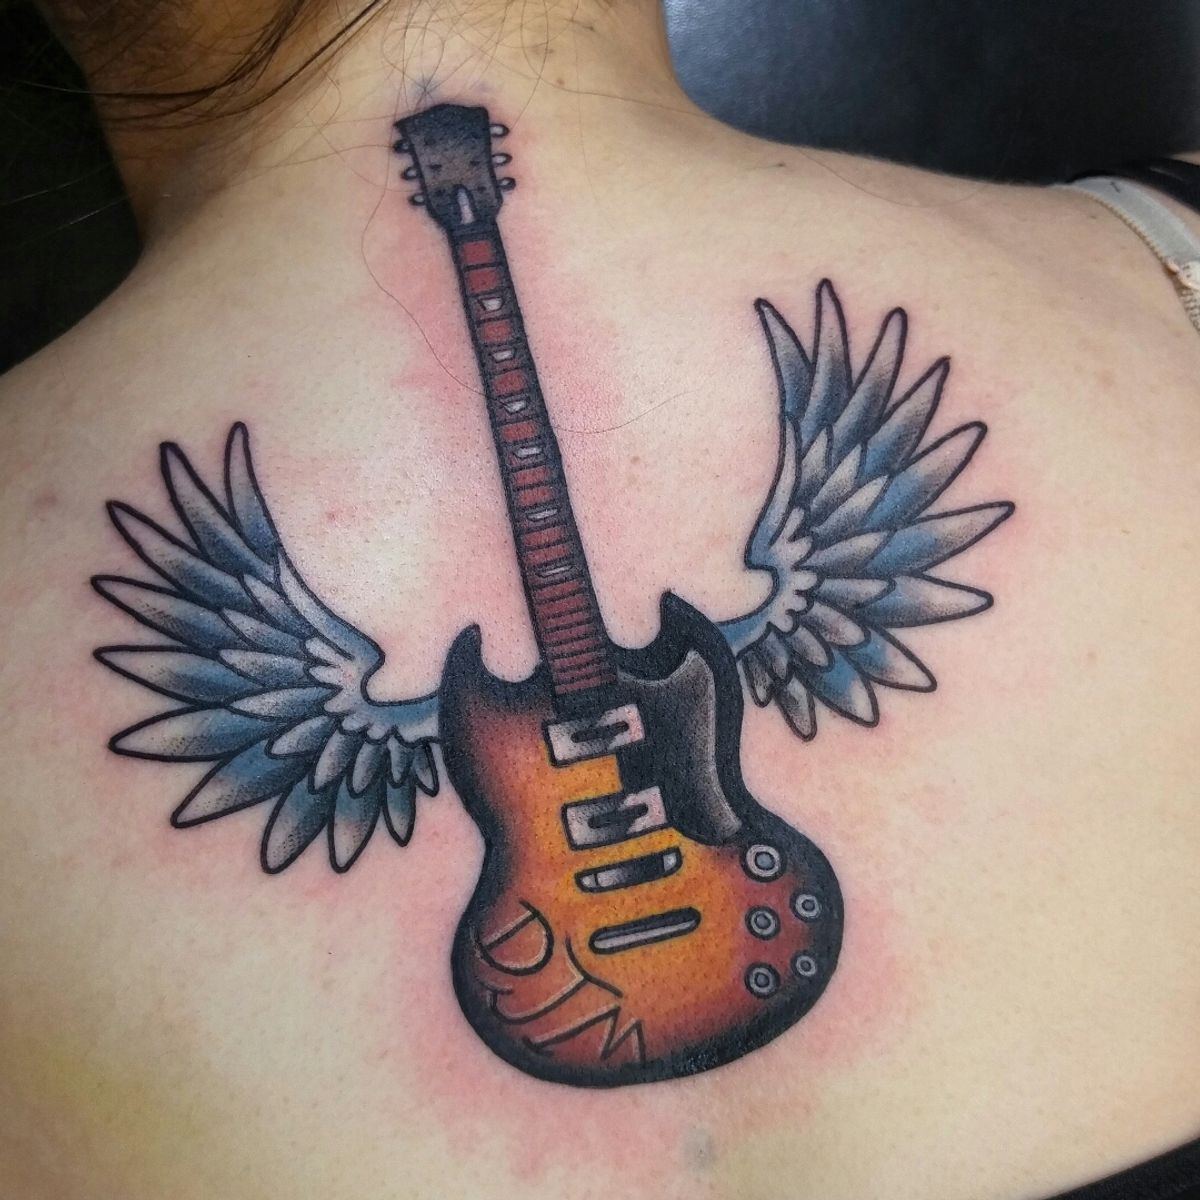 Tattoo uploaded by Christopher Dolsen • One from a couple months back # guitar #wings #traditional • Tattoodo